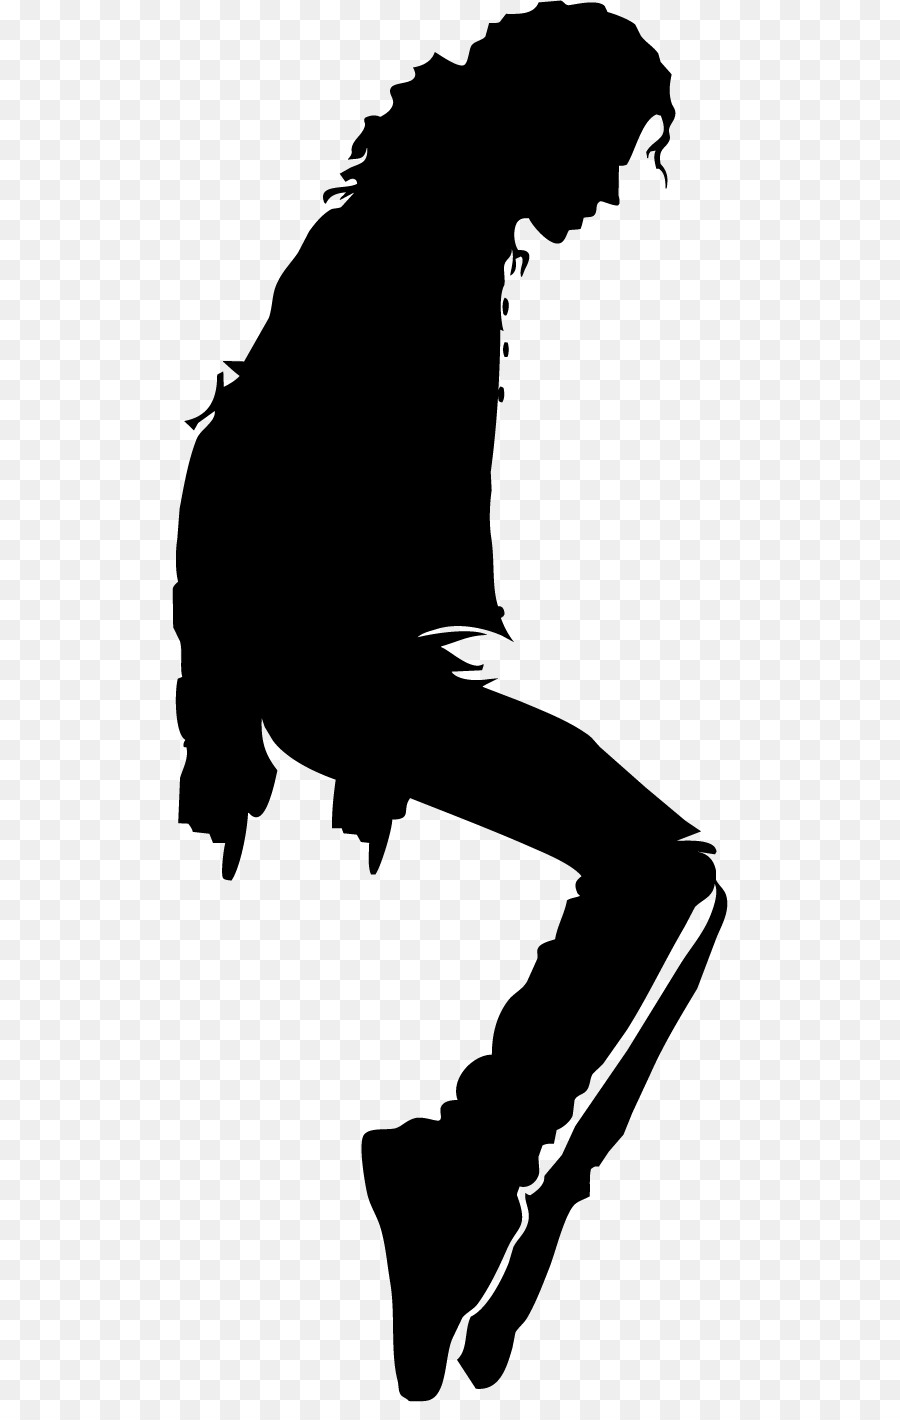 Bumper sticker Wall decal - Michael Jackson dancing silhouette material png download - 556*1402 - Free Transparent Sticker png Download.